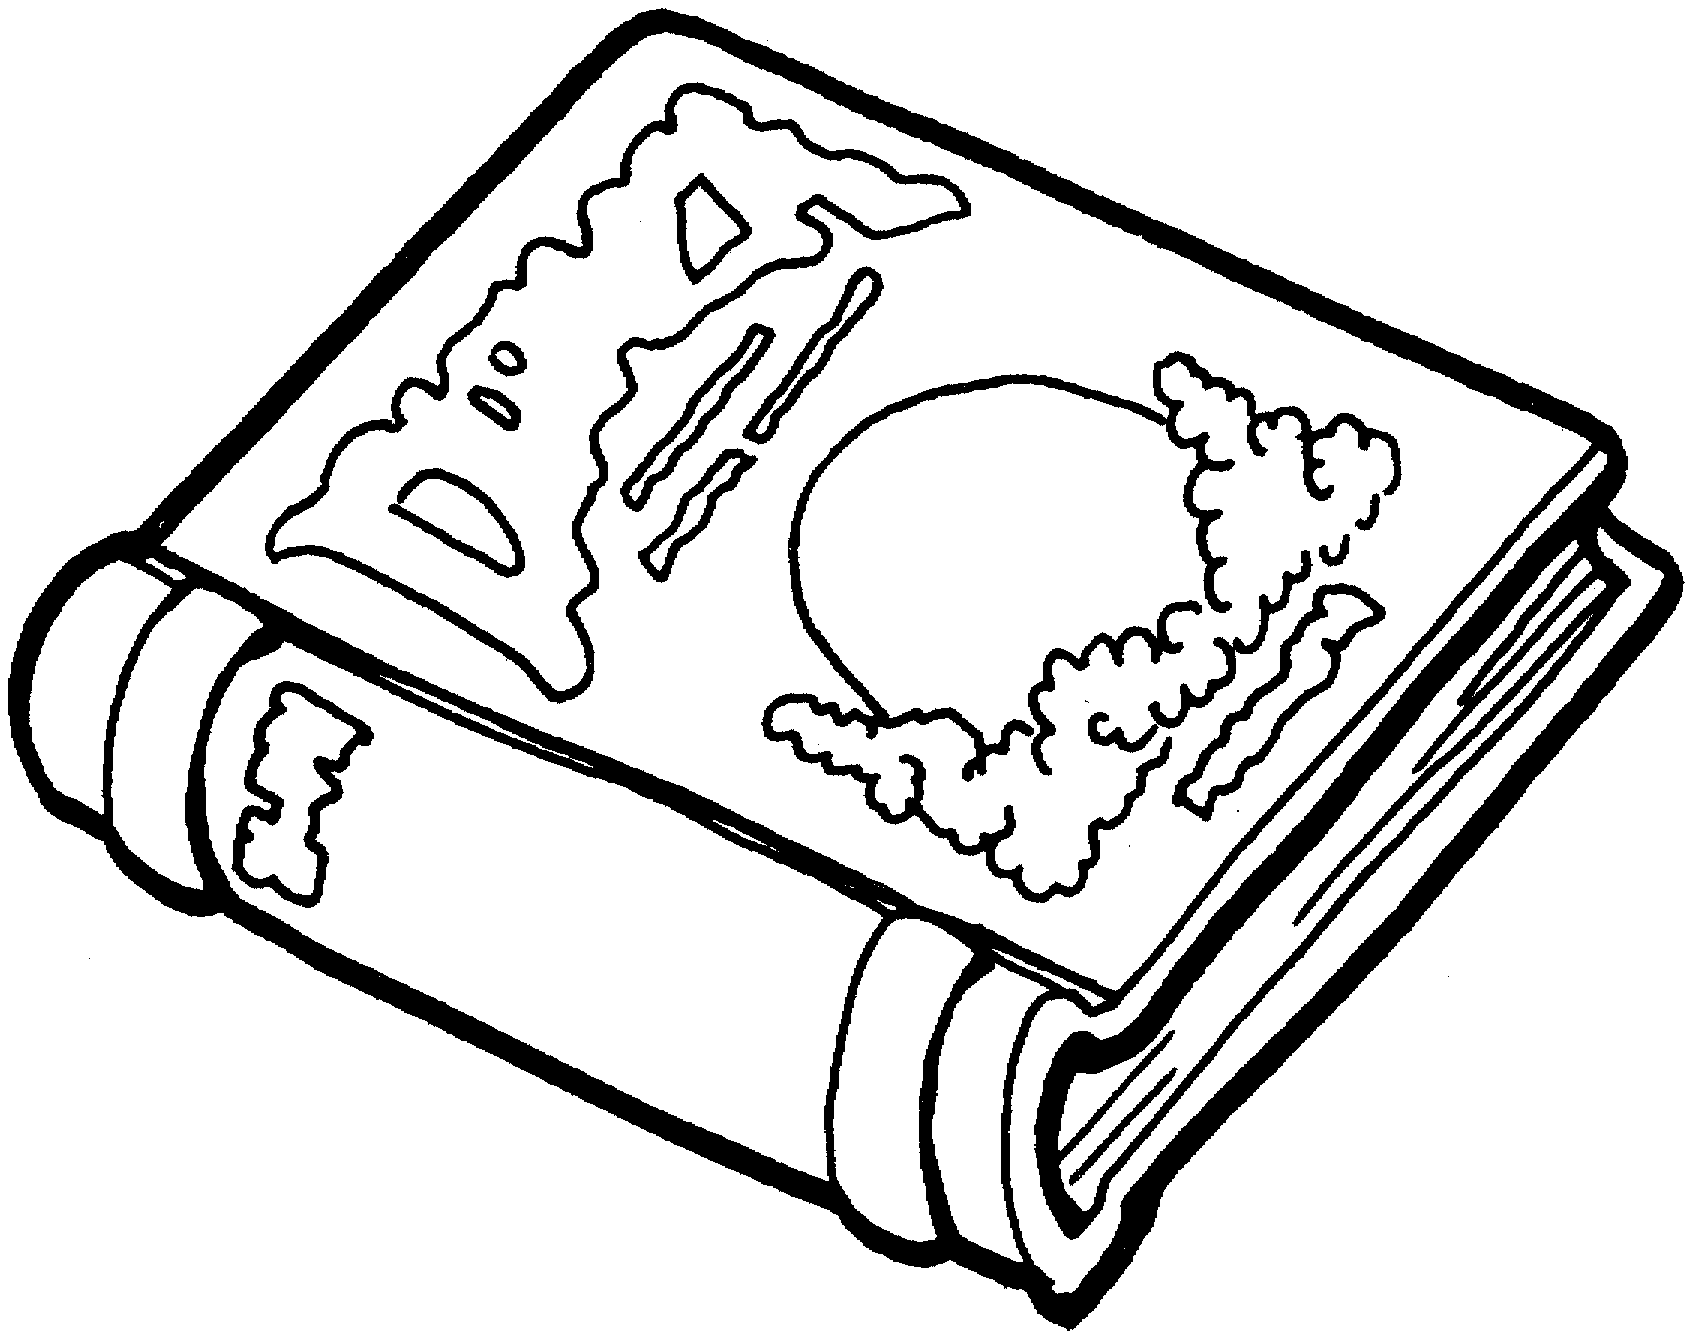 Free Coloring Pages Of Books, Download Free Coloring Pages Of Books png